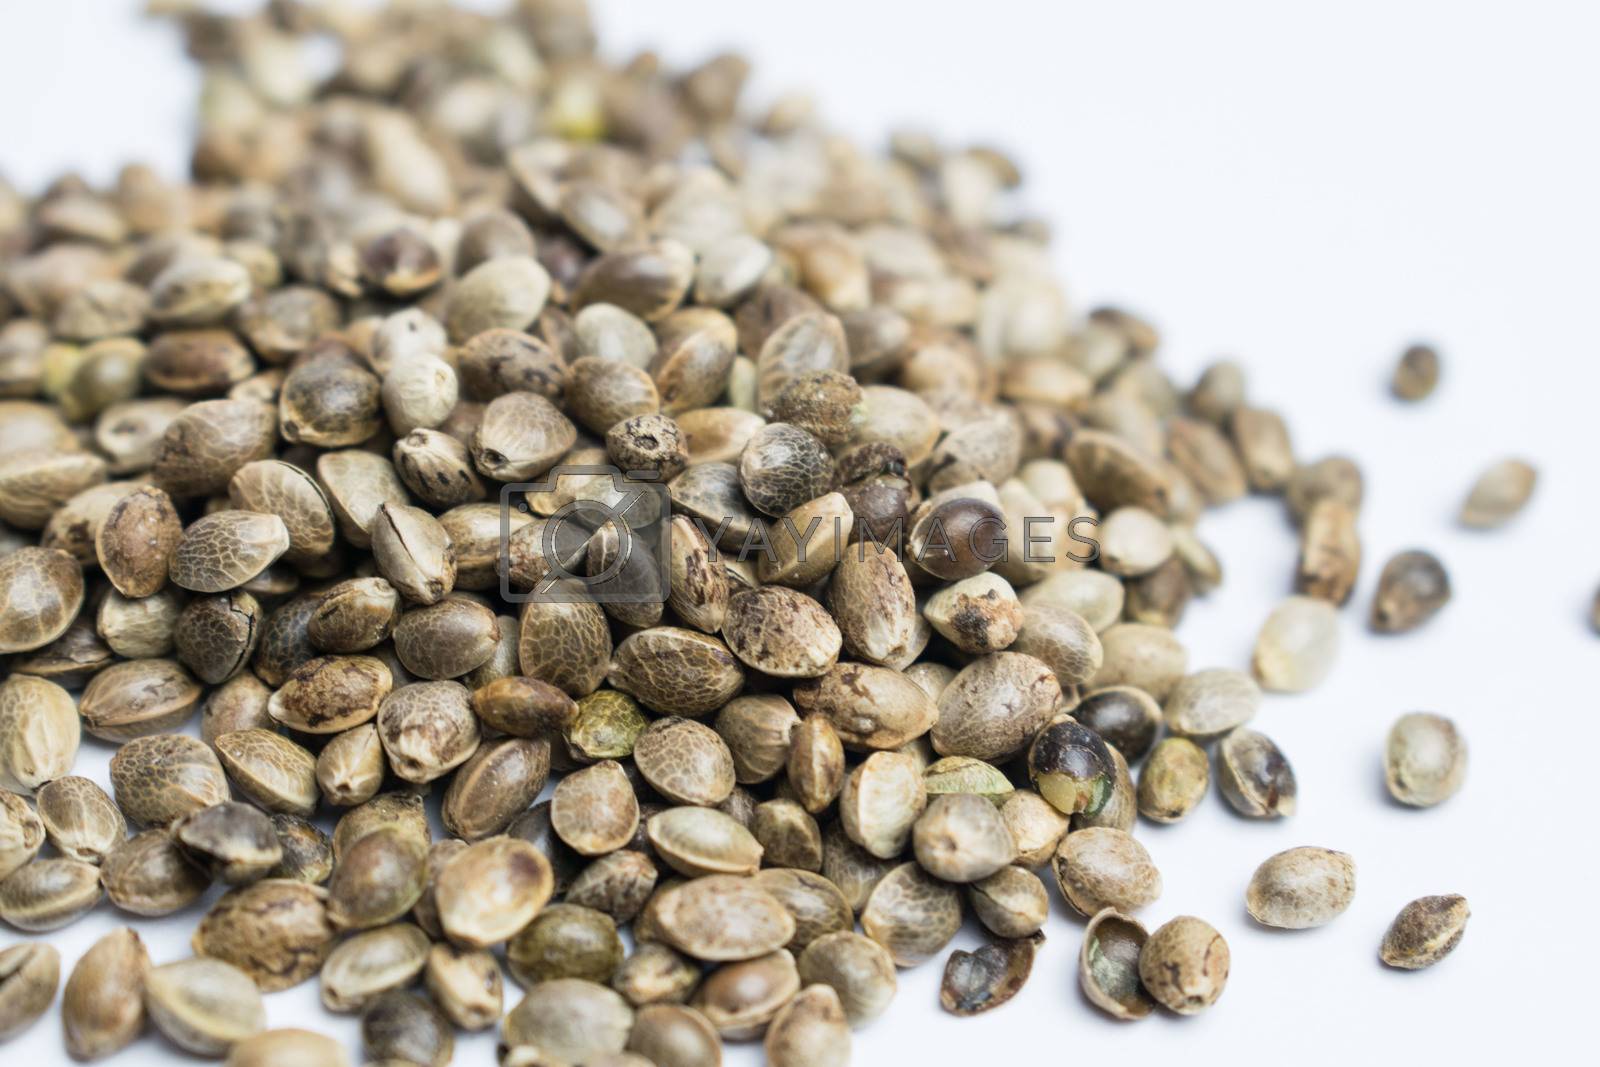 Royalty free image of Many cannabis seeds by federica_favara